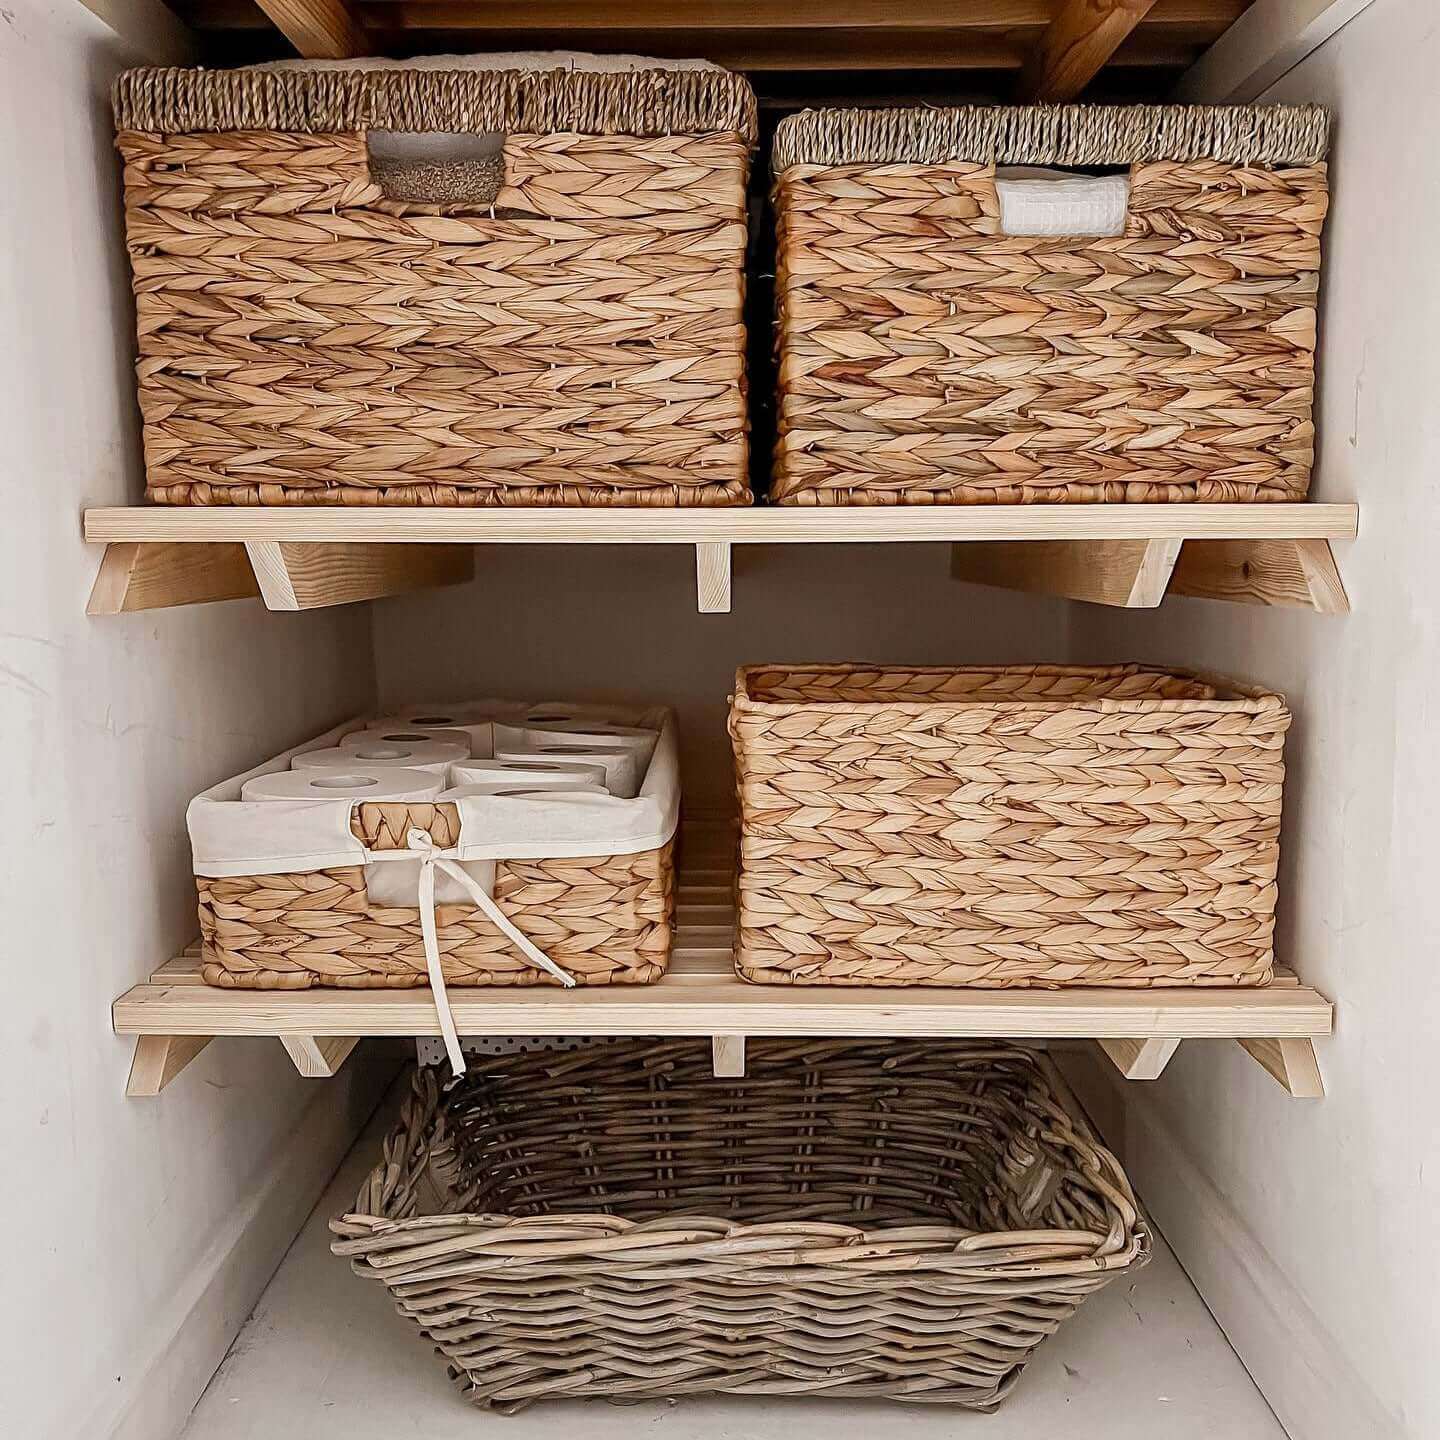 Airing Cupboard Wooden Slatted Shelves - 83 cm by 50 cm